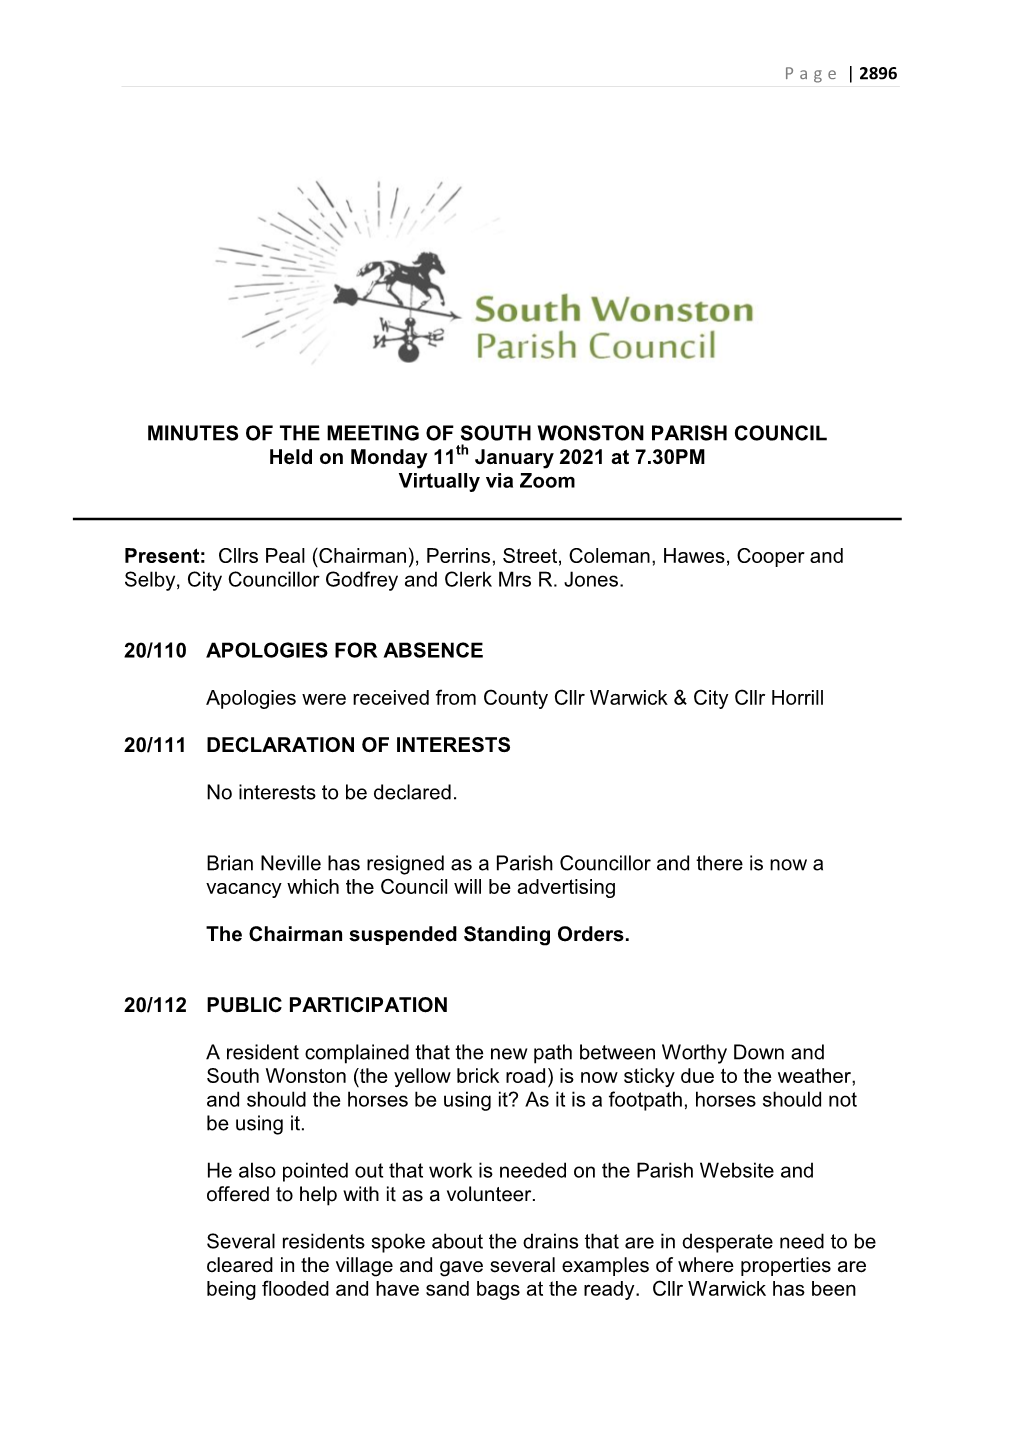 MINUTES of the MEETING of SOUTH WONSTON PARISH COUNCIL Held on Monday 11Th January 2021 at 7.30PM Virtually Via Zoom